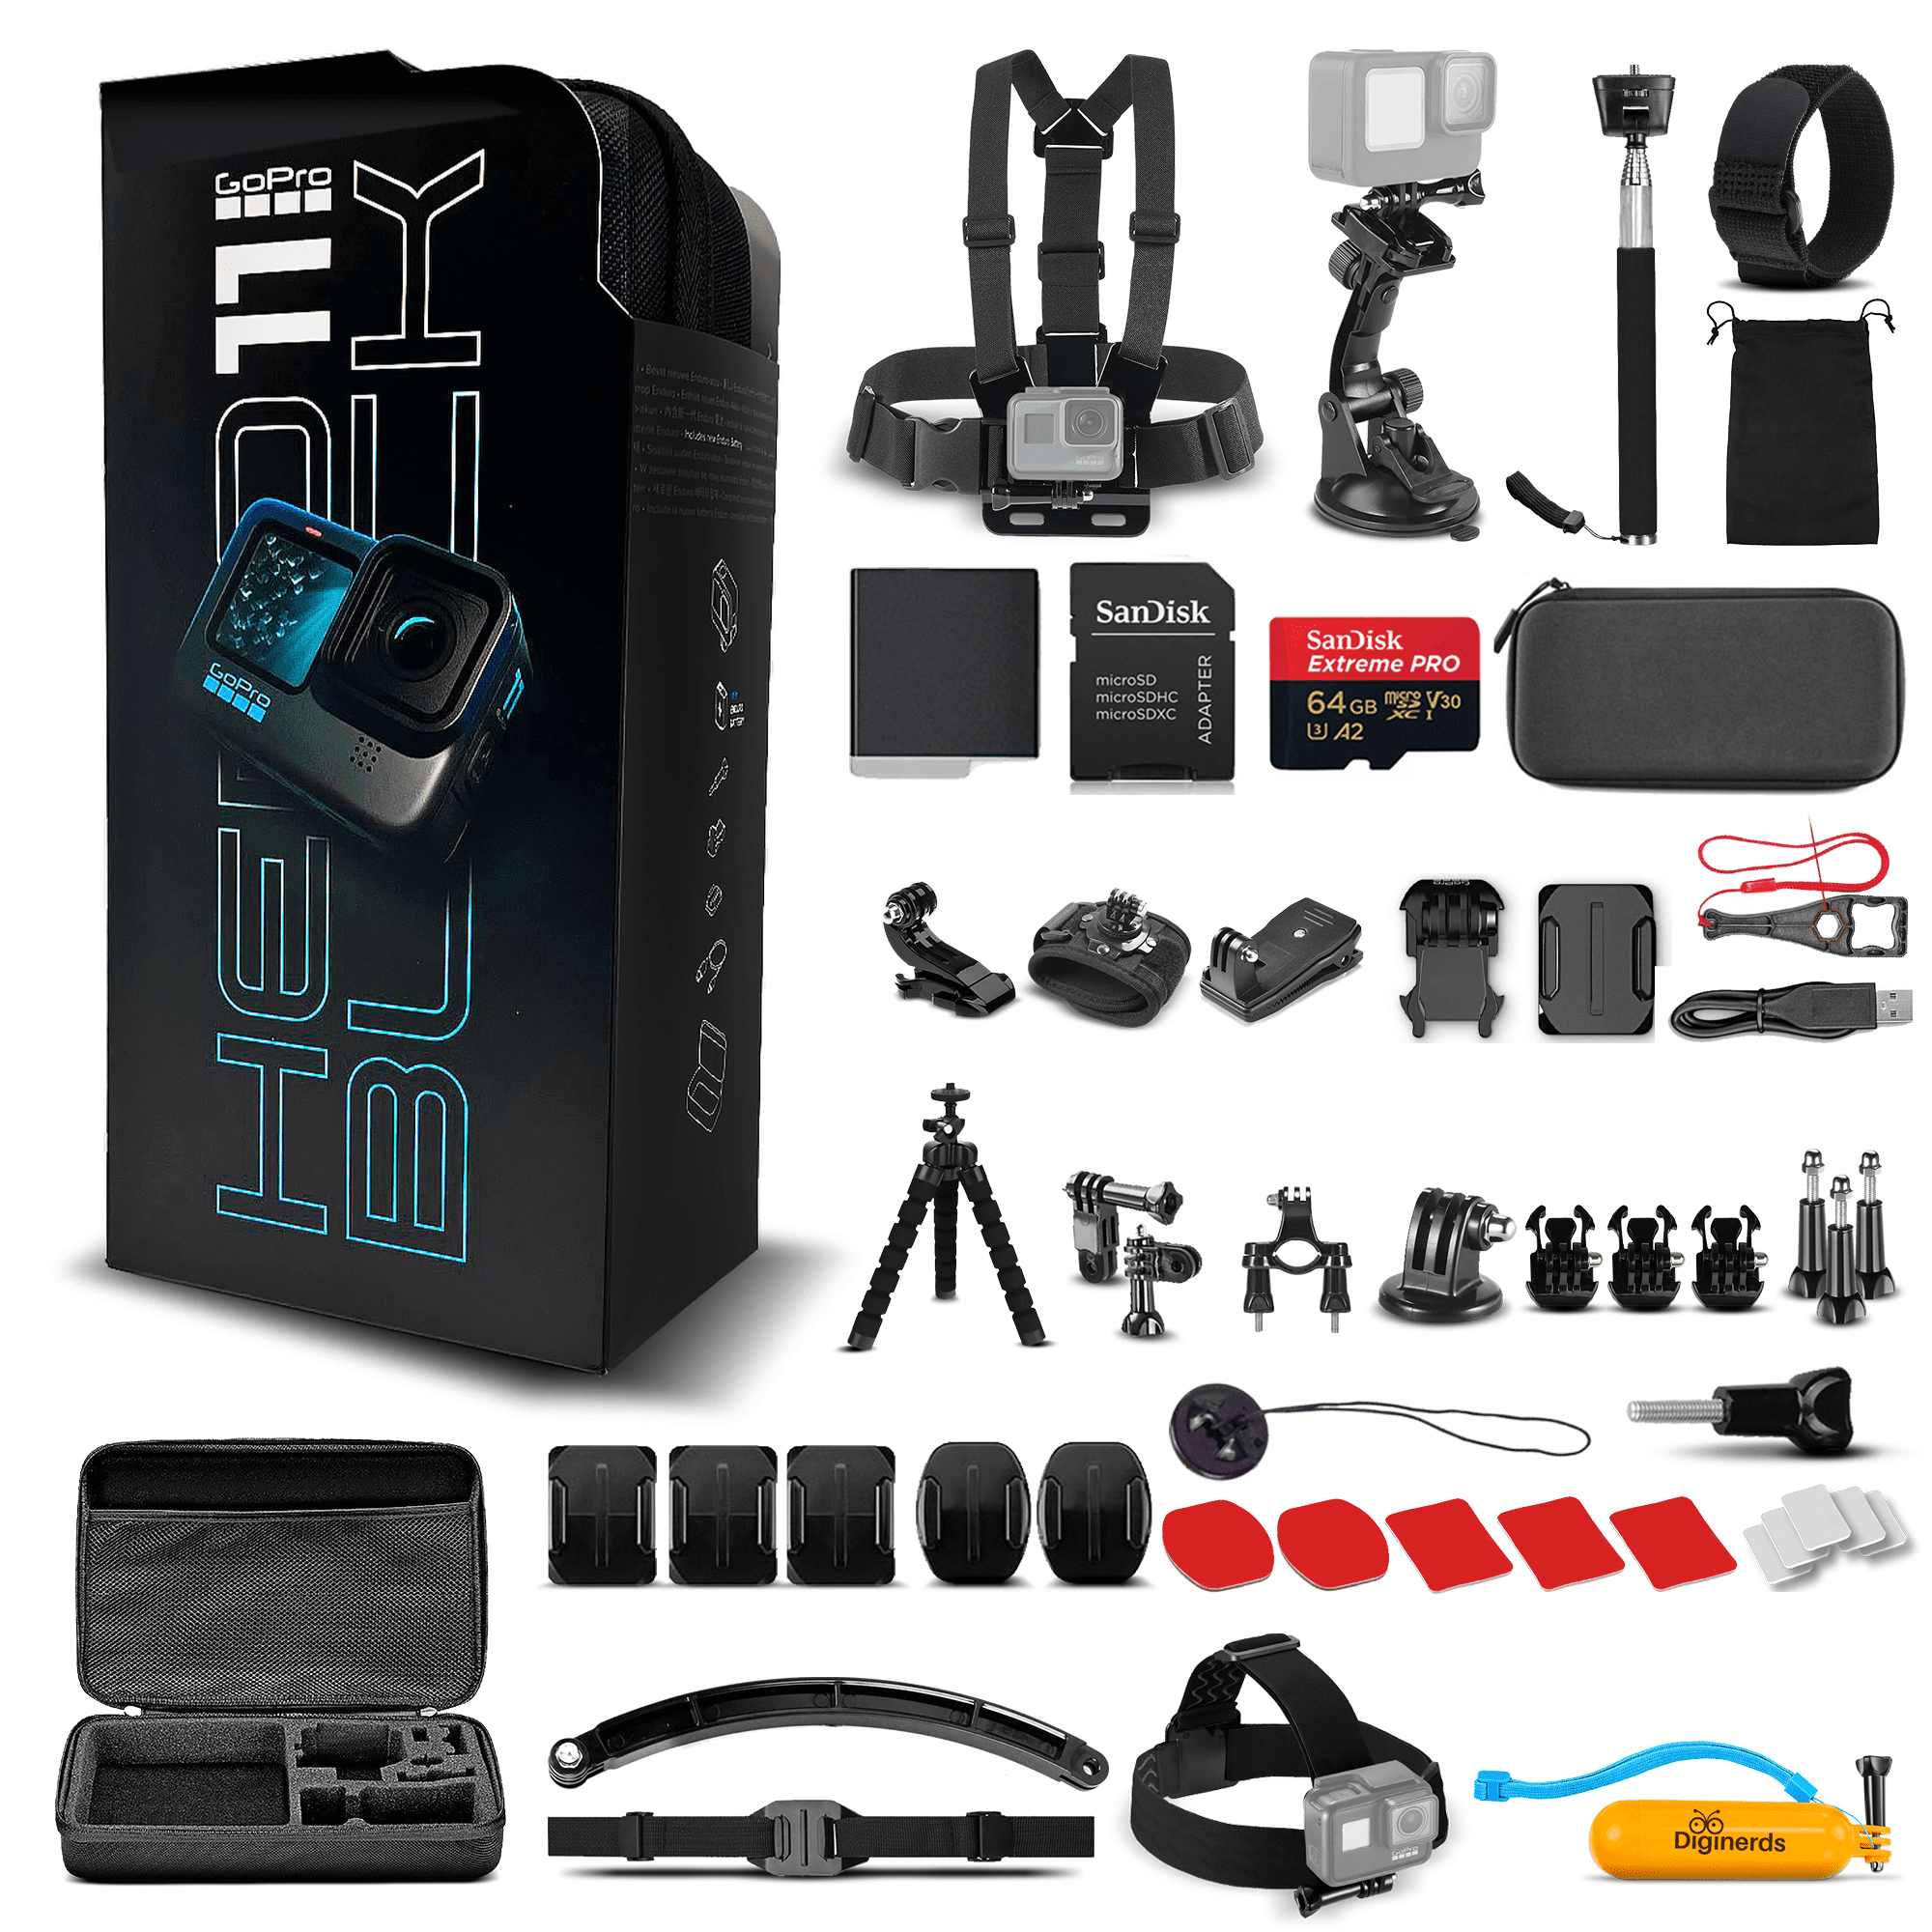 GoPro HERO11 Black (New) - 27MP Waterproof Camera with 5.3K Video + 64GB  Card and DigiNerds 50-piece Action Kit